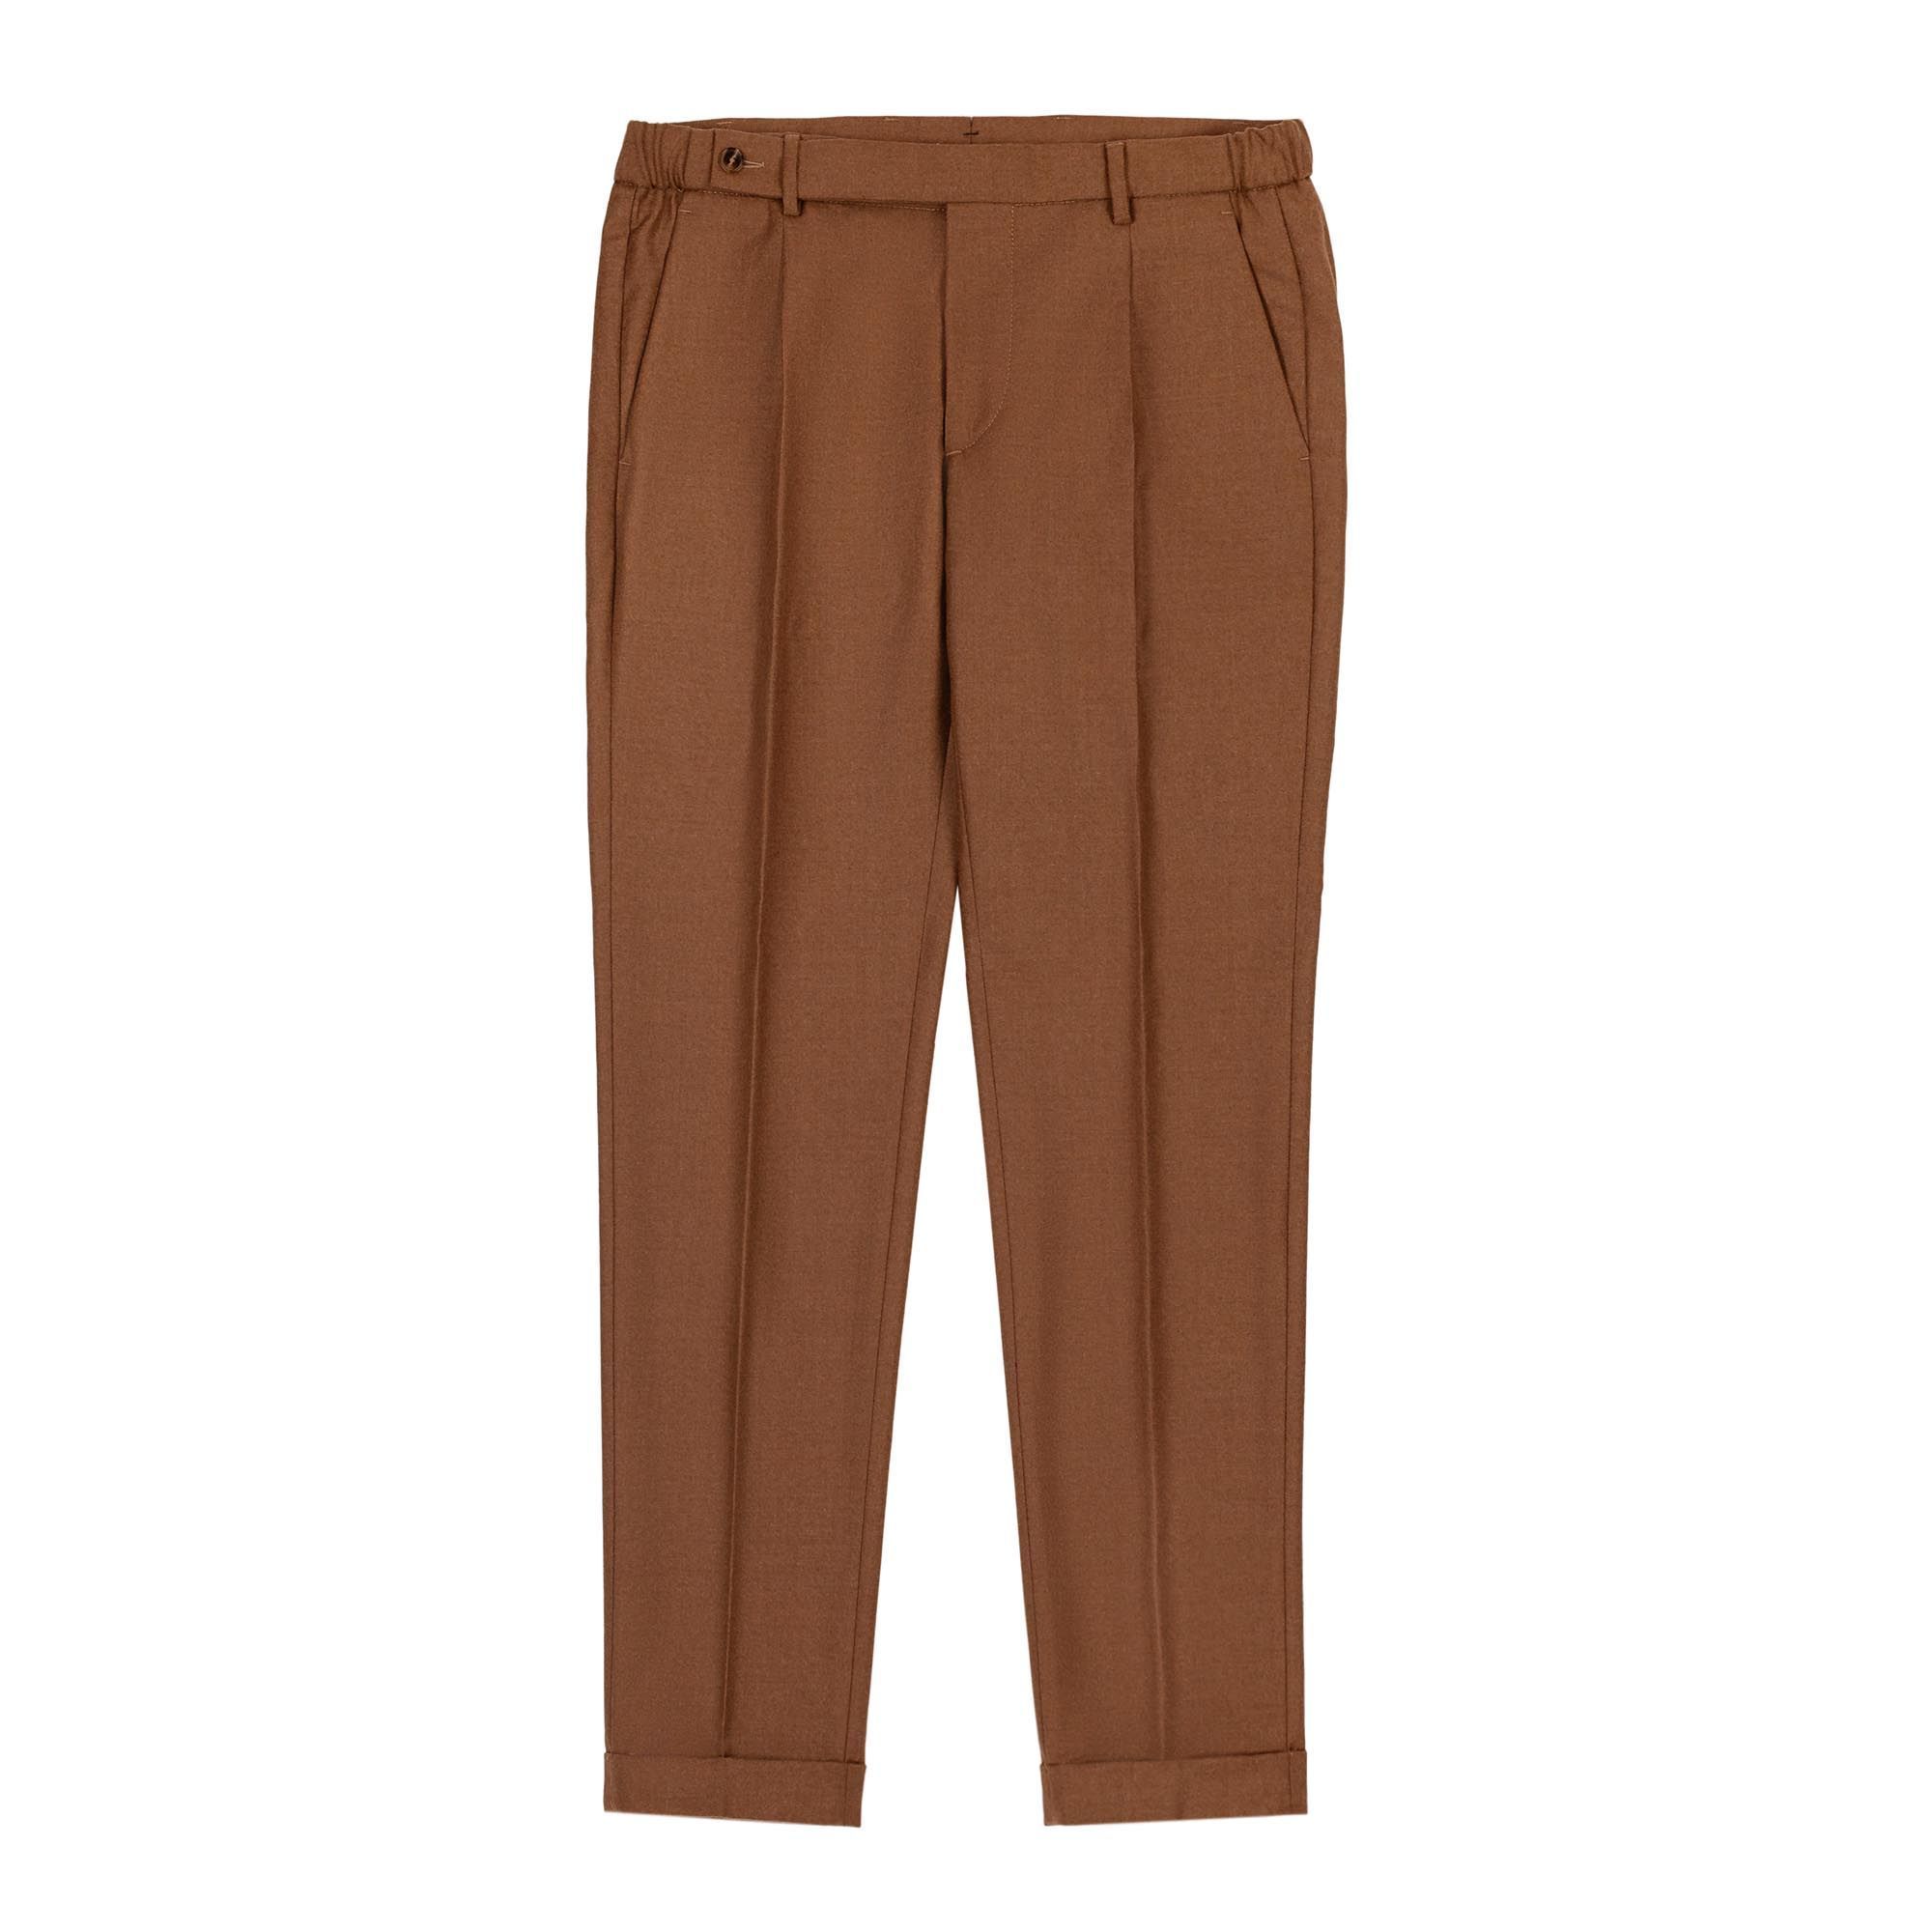 Men's Brown Flannel Trousers